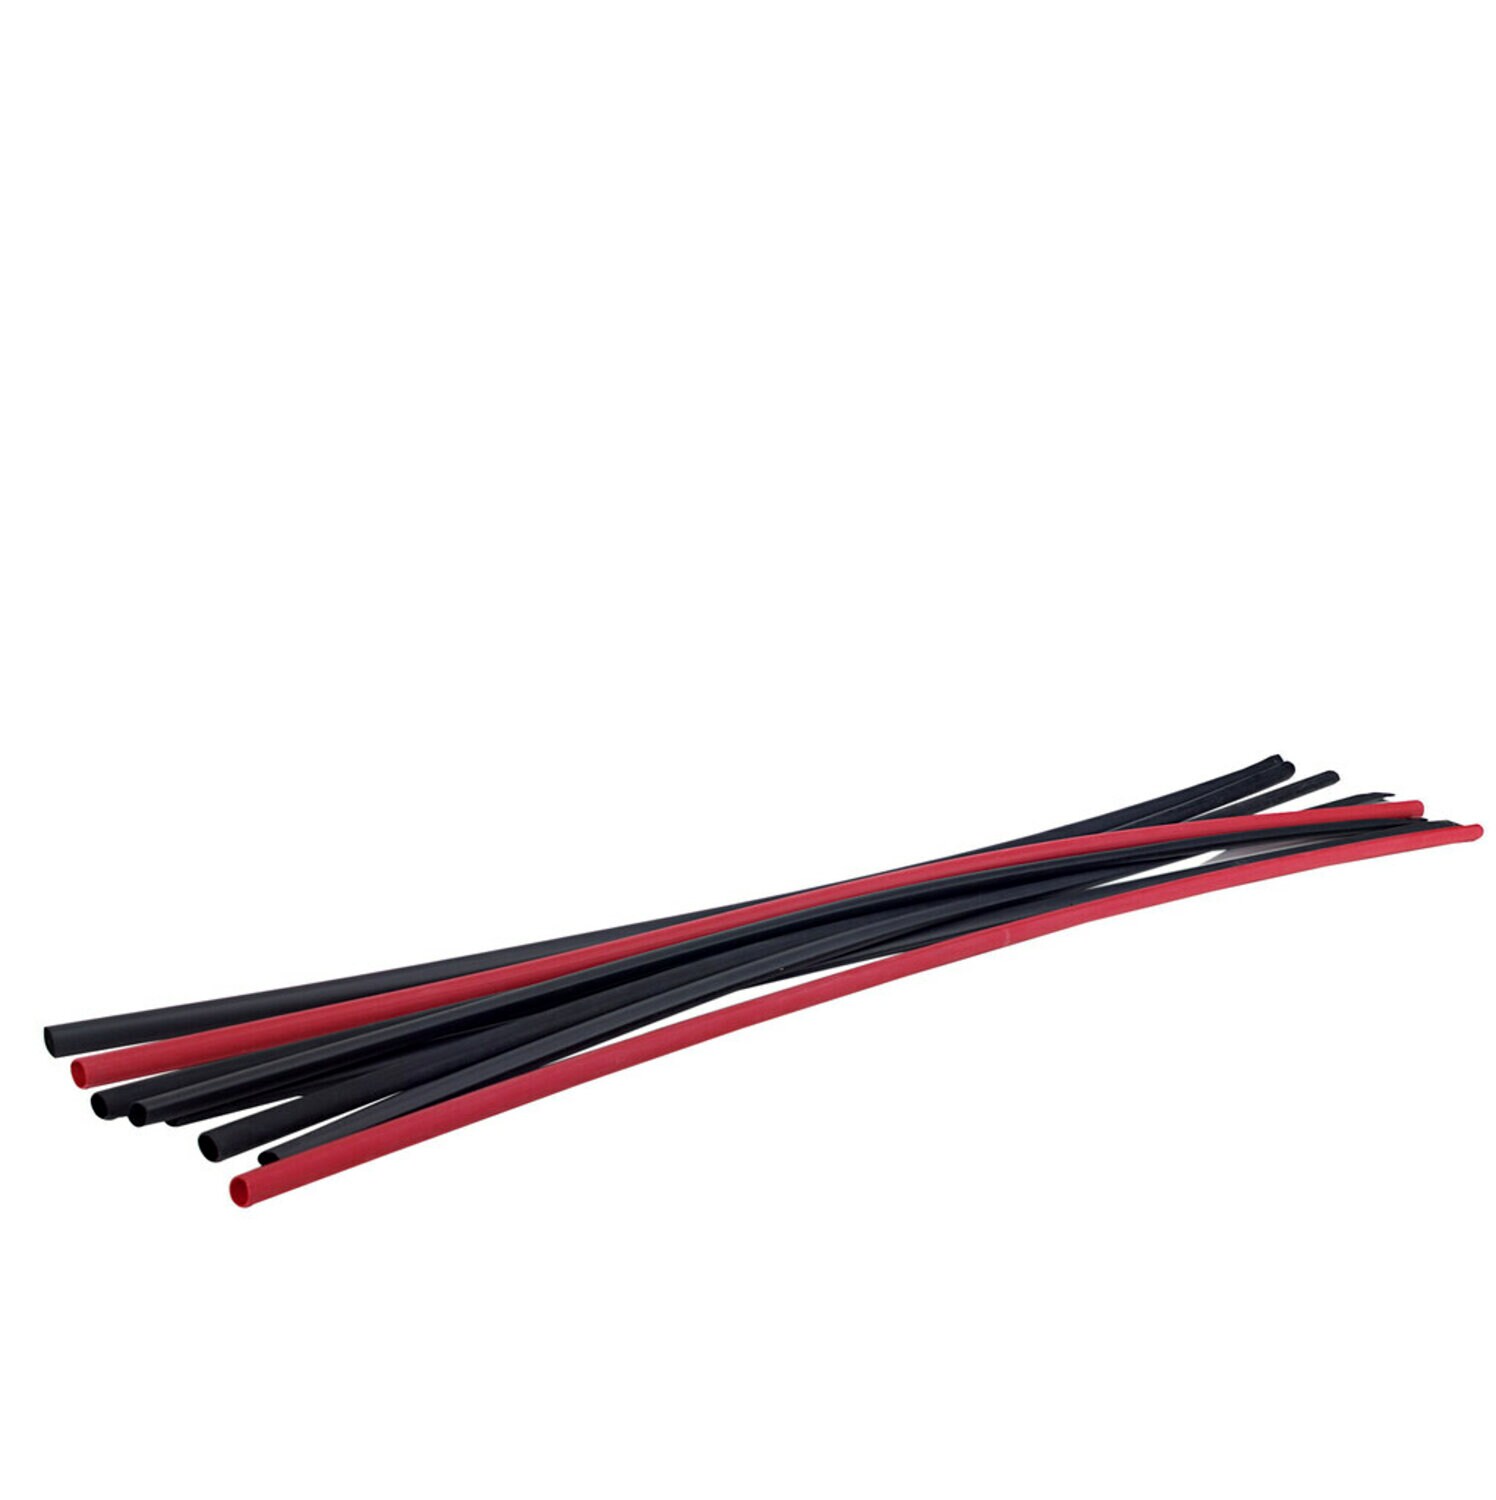 7010304225 - 3M Heat Shrink Thin-Wall Tubing FP-301-3/32-48"-Red-Hdr-25 Pcs, 48 in
Length sticks with header label, 25 pieces/case